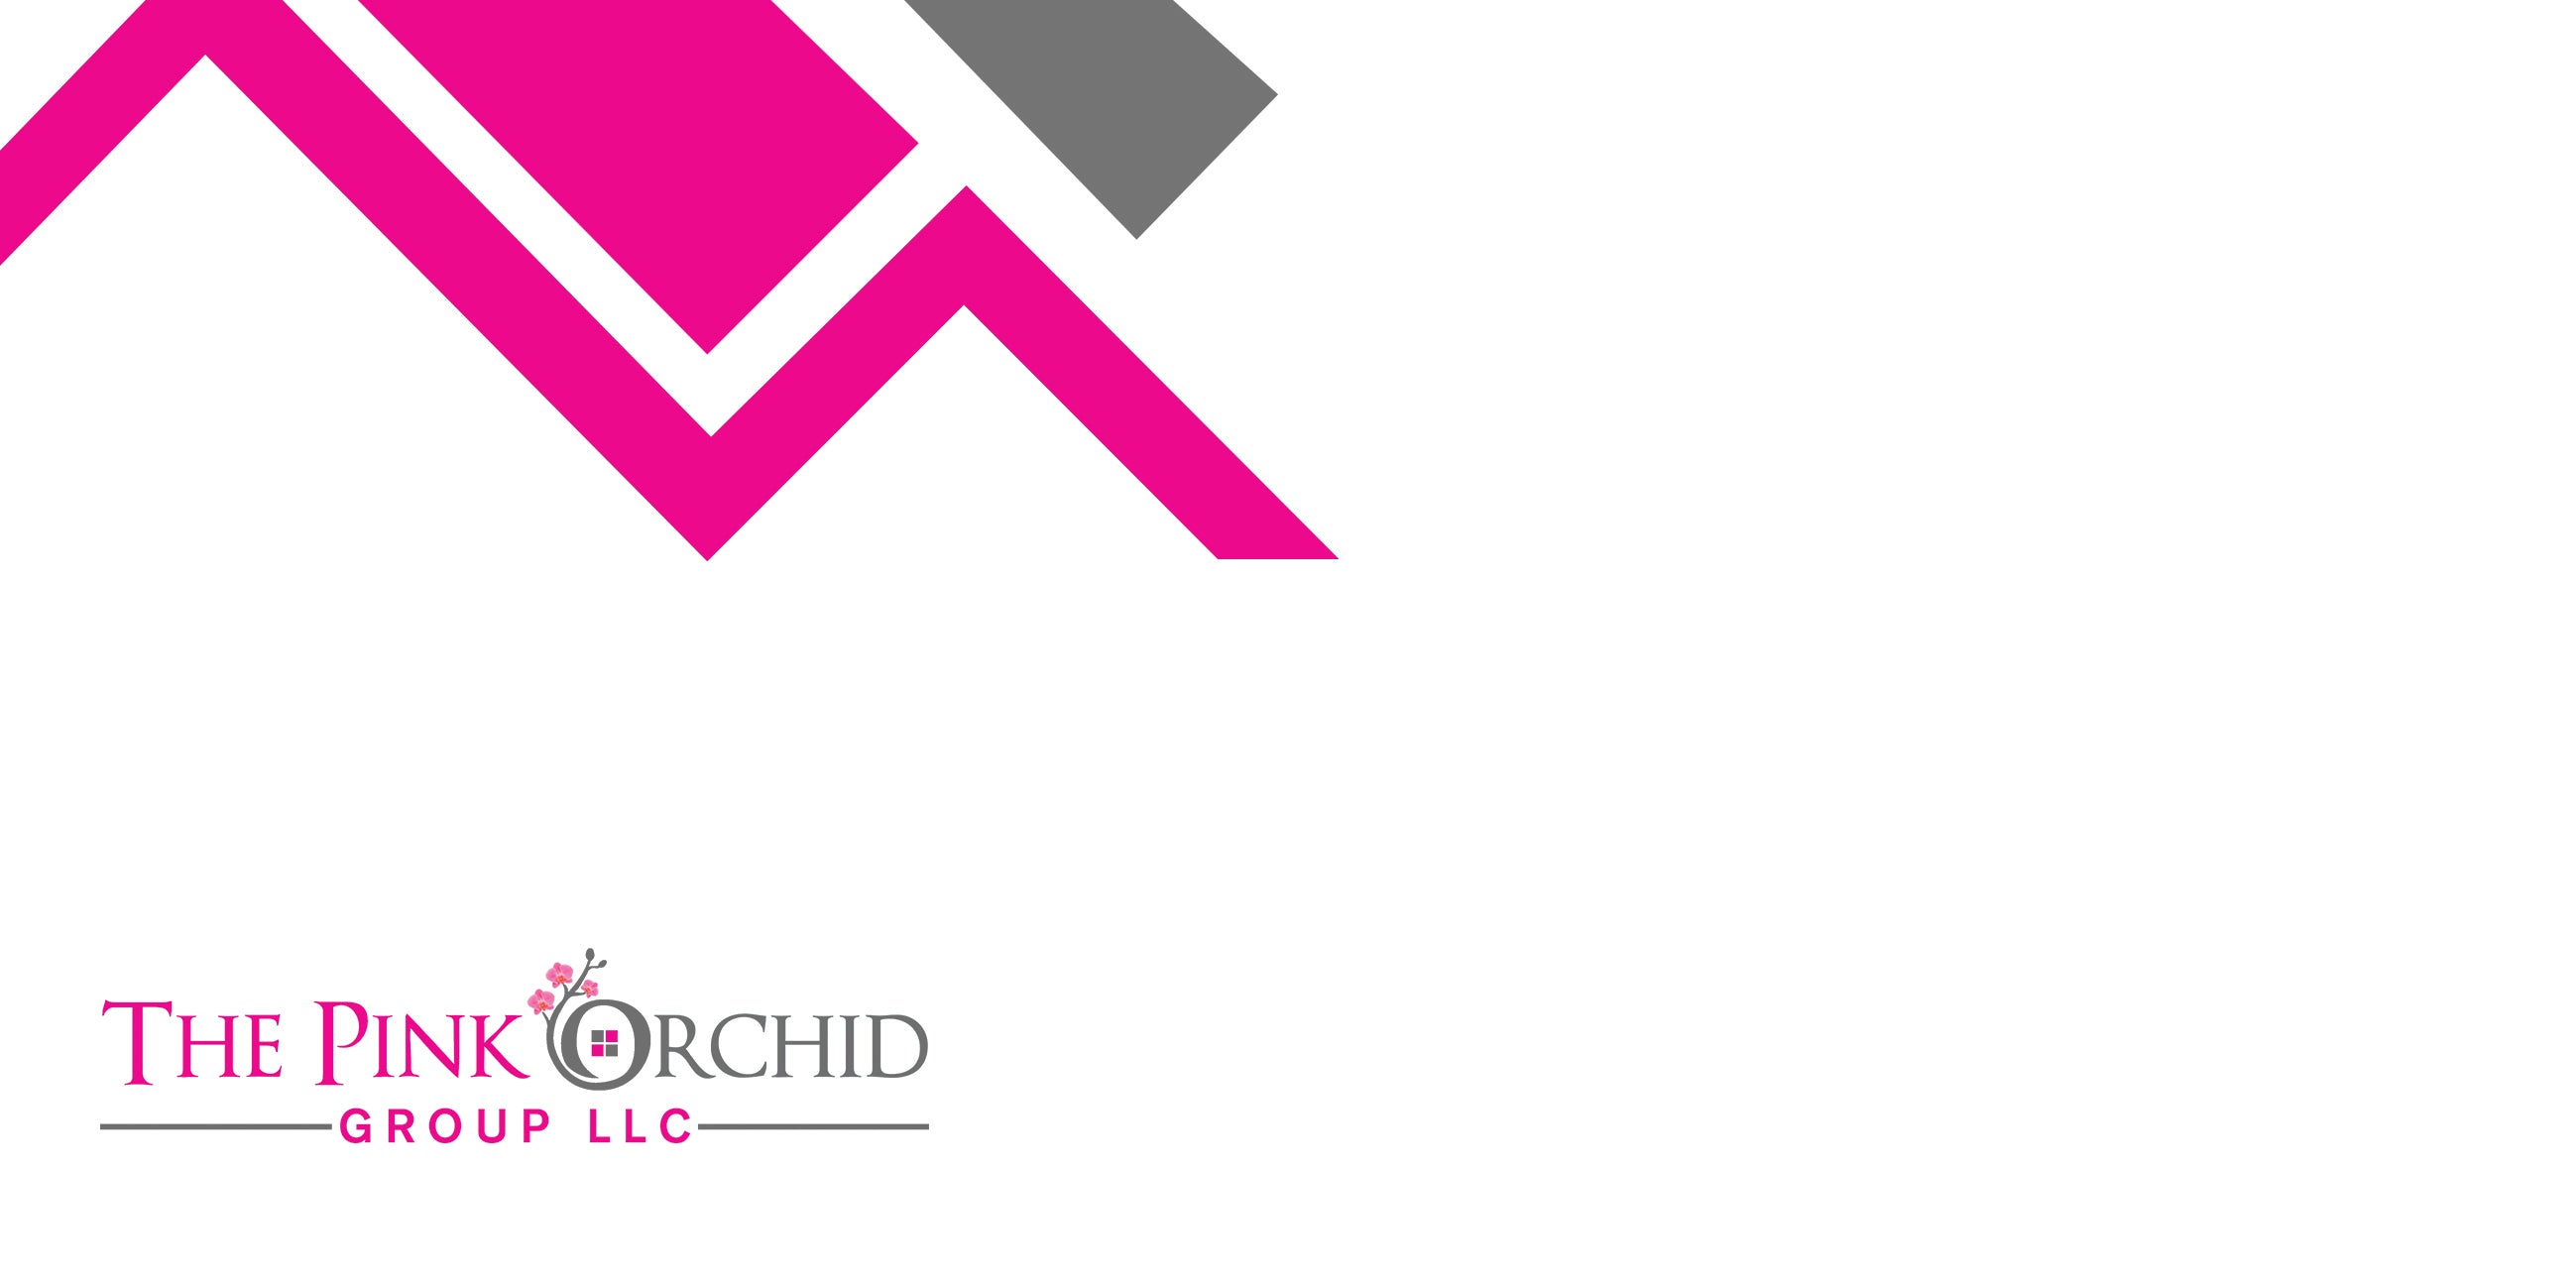 The Pink Orchid Group LLC